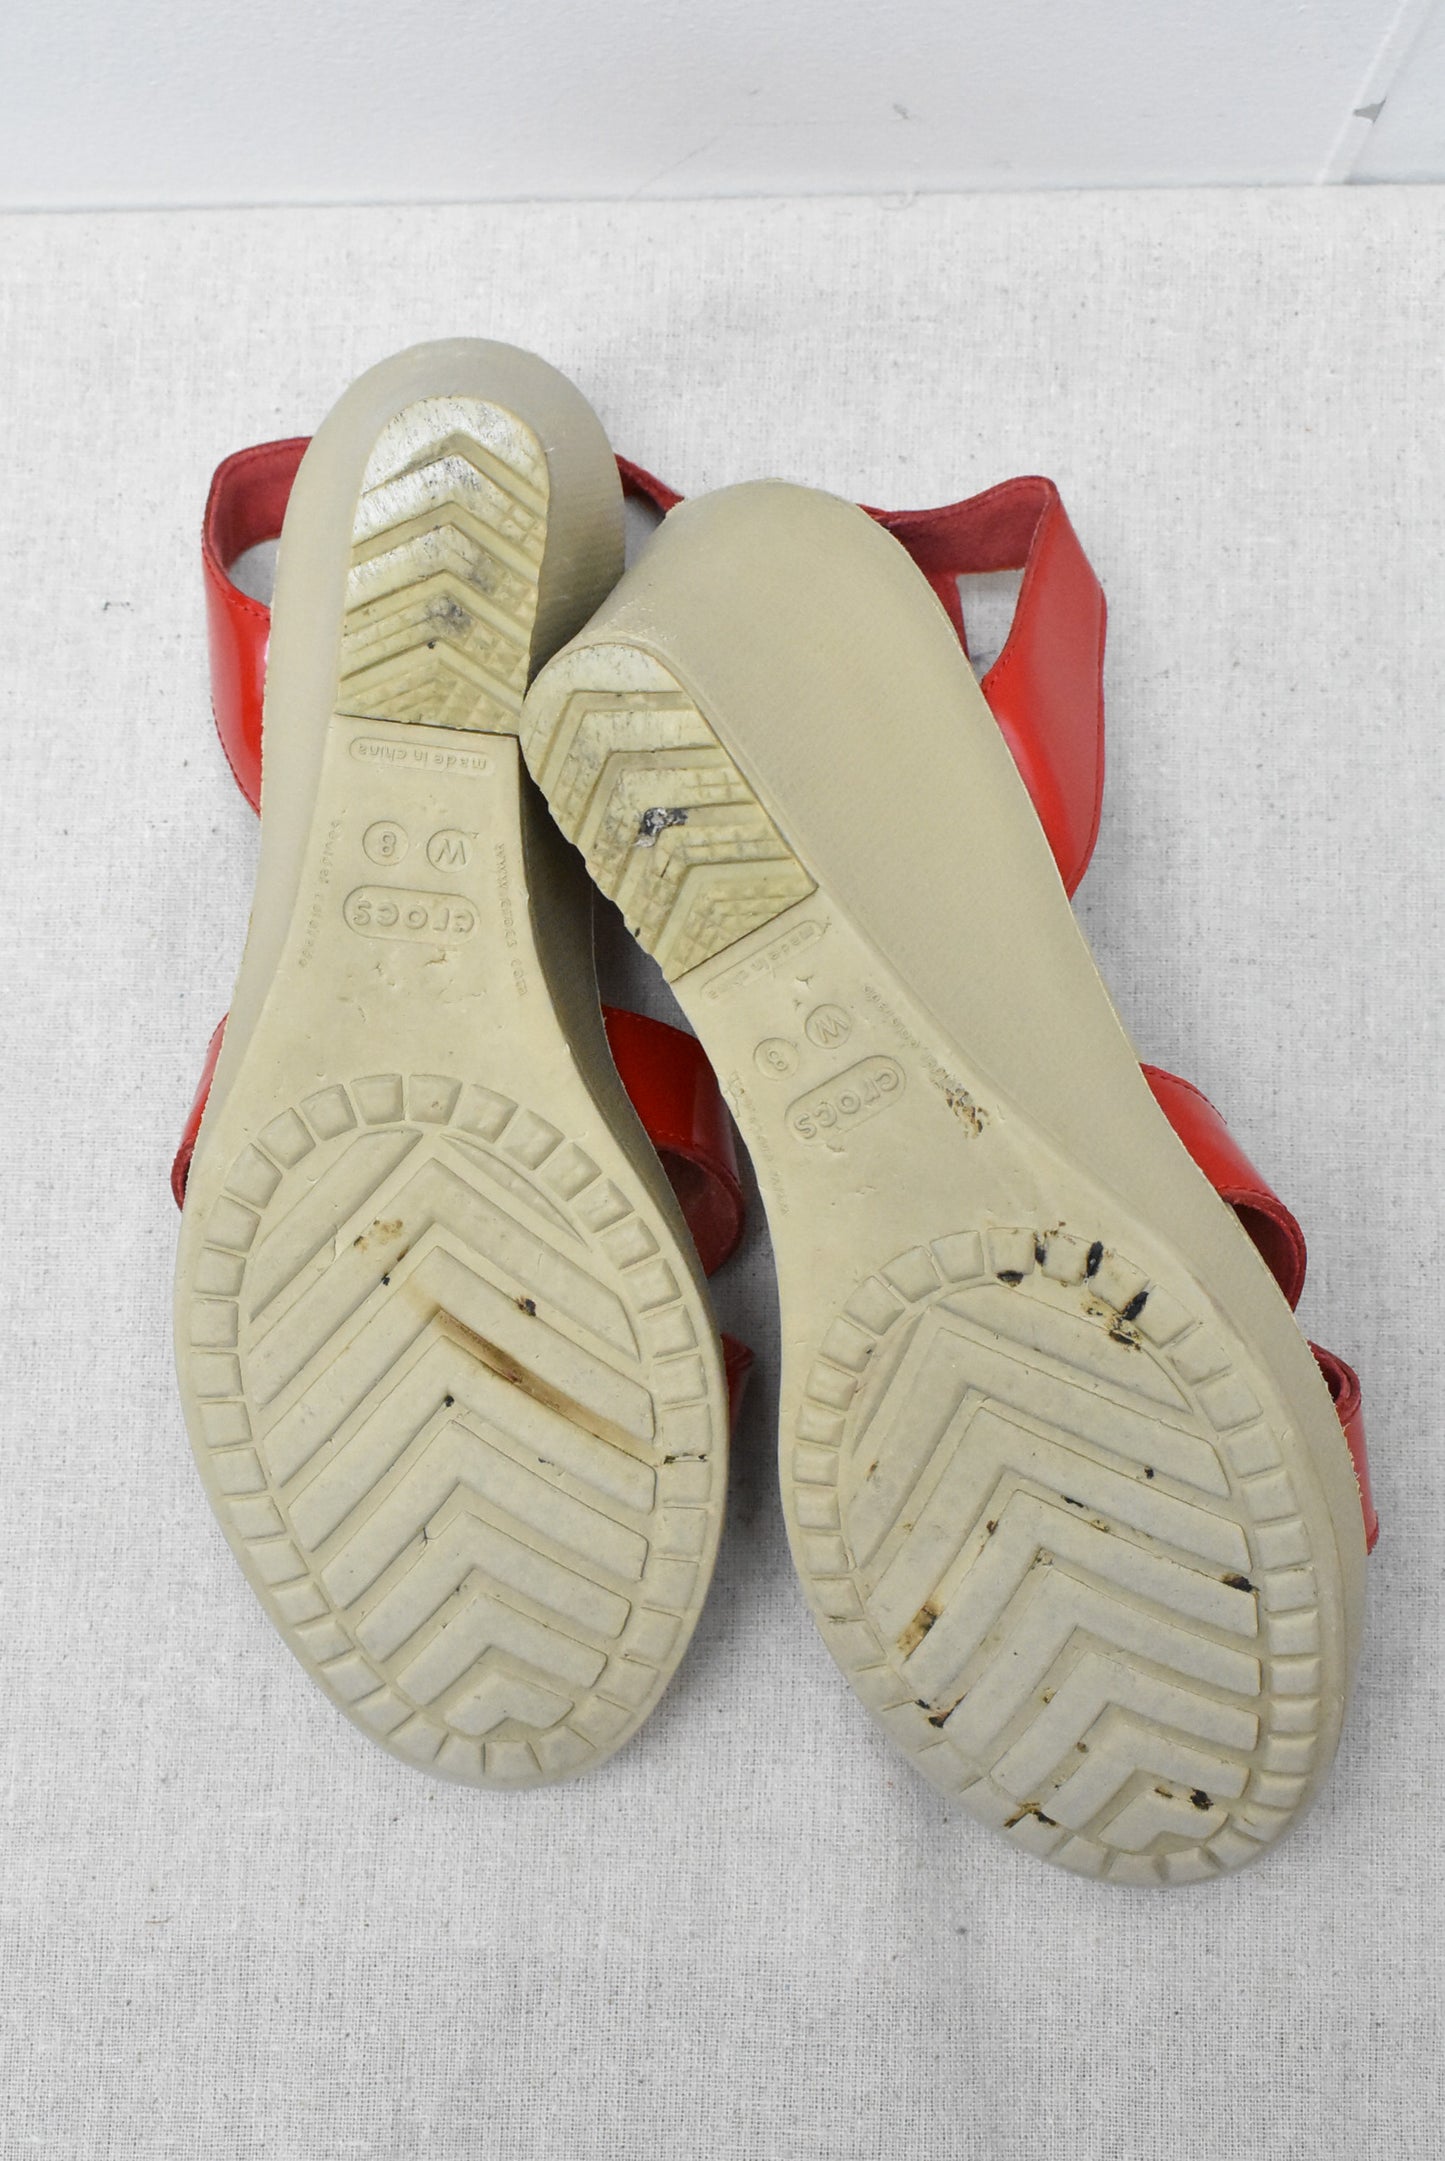 Red Croc wedges 8